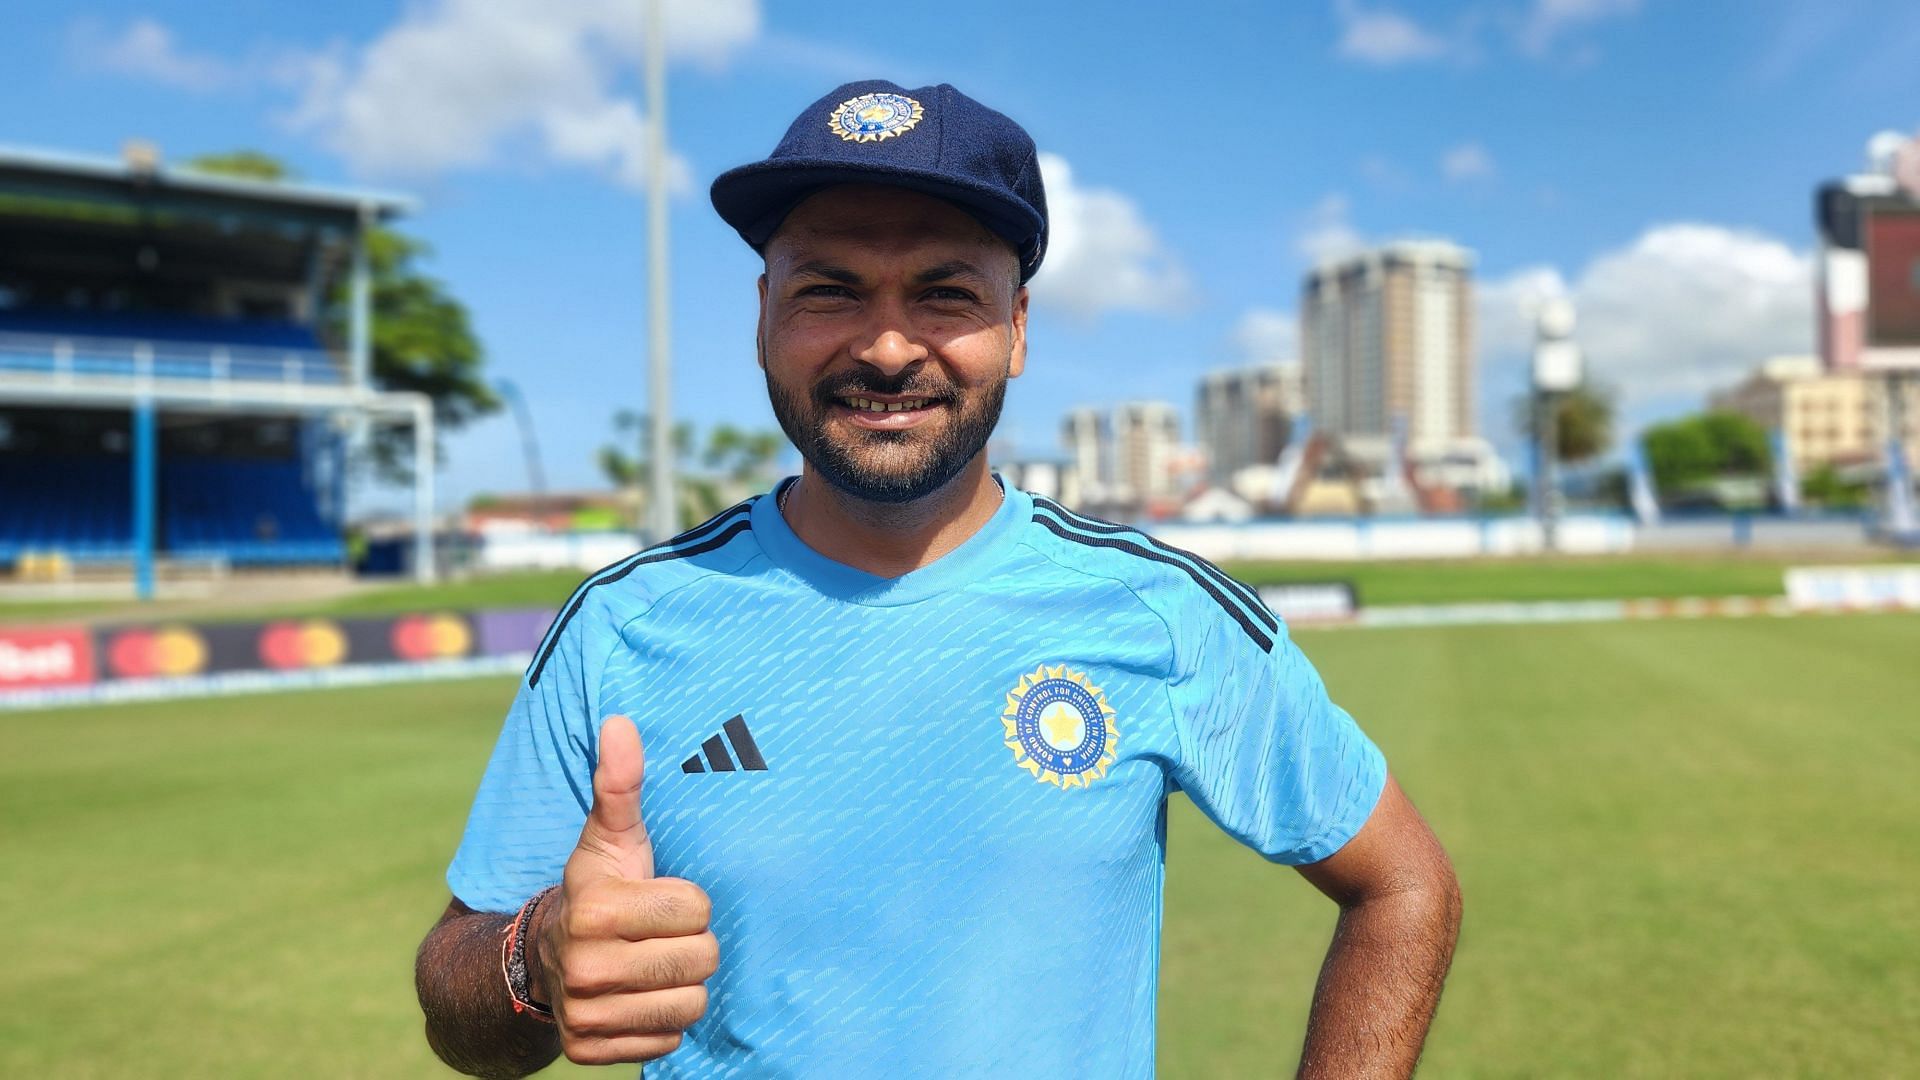 Mukesh Kumar made his Test debut in Trinidad and picked up two wickets